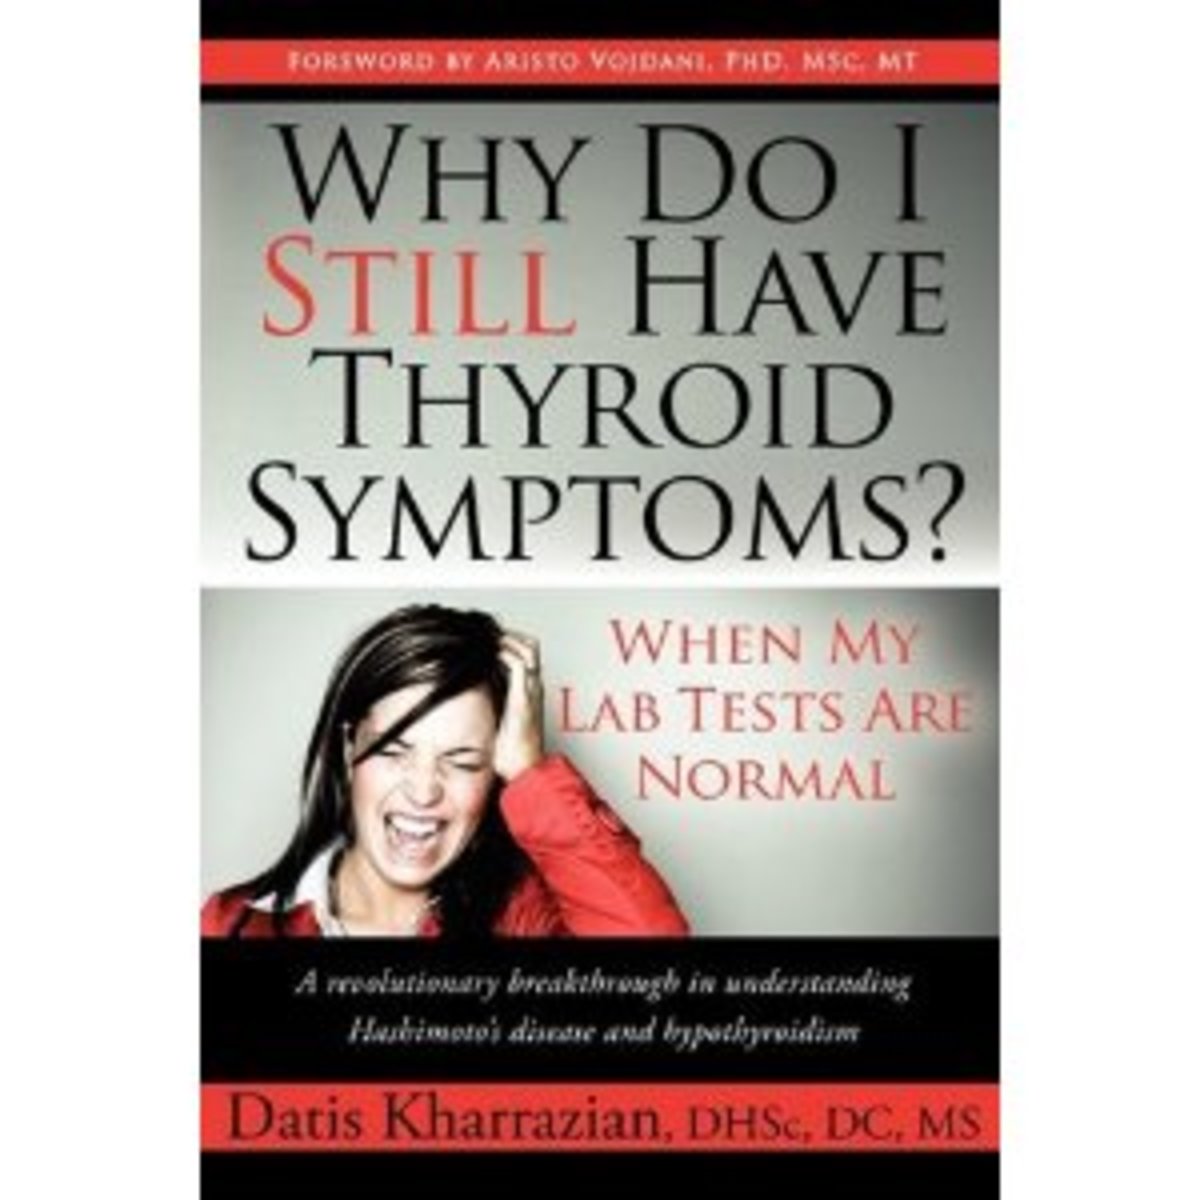 Weight Loss with Hashimoto's or Hypothyroidism